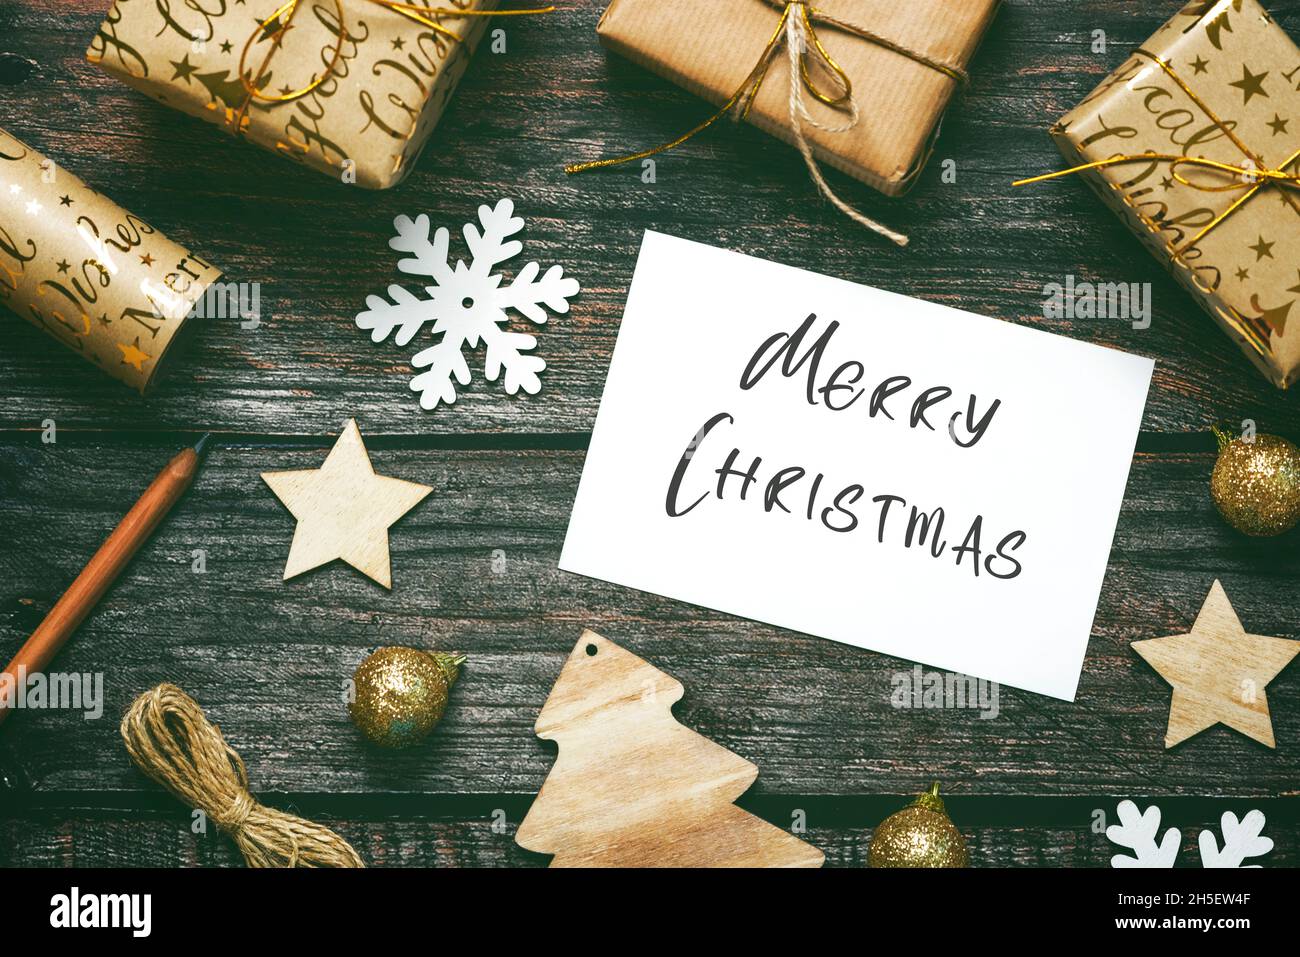 Merry Christmas. Top view of Christmas ornaments and christmas greeting card on wooden table. Christmas concept background Stock Photo